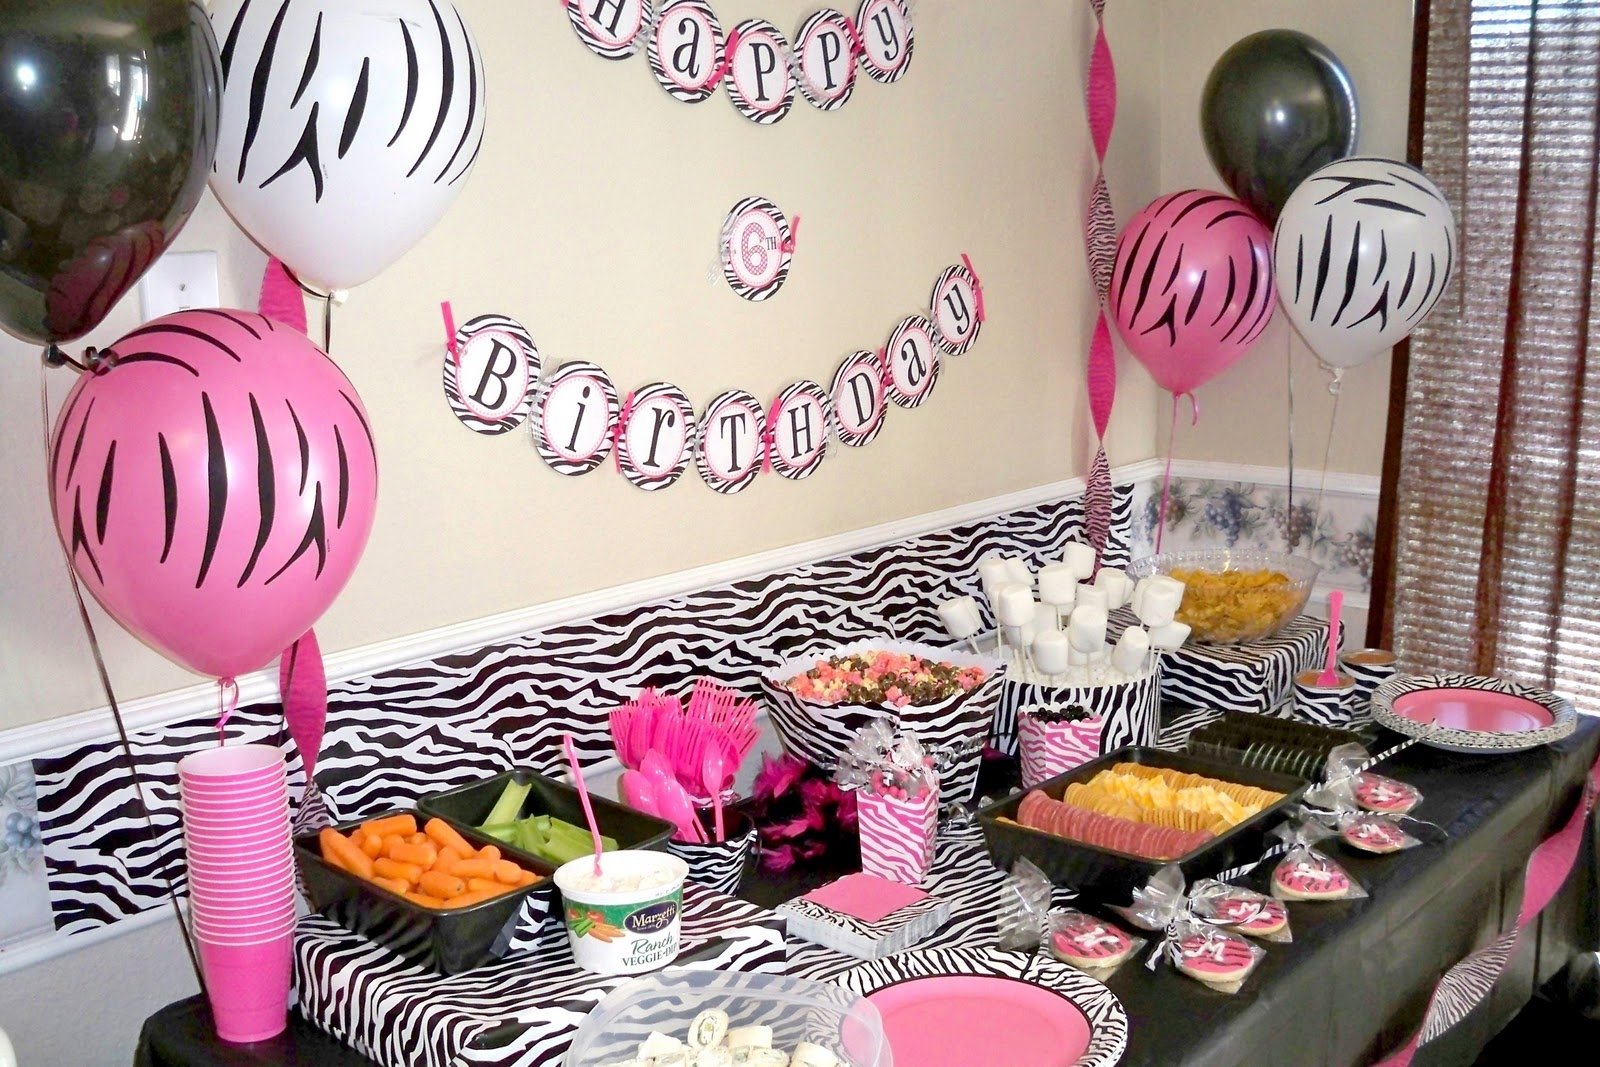 10 Beautiful Pink And Black Birthday Party Ideas hot pink zebra diva birthday party ideas animal print party table 1 2022